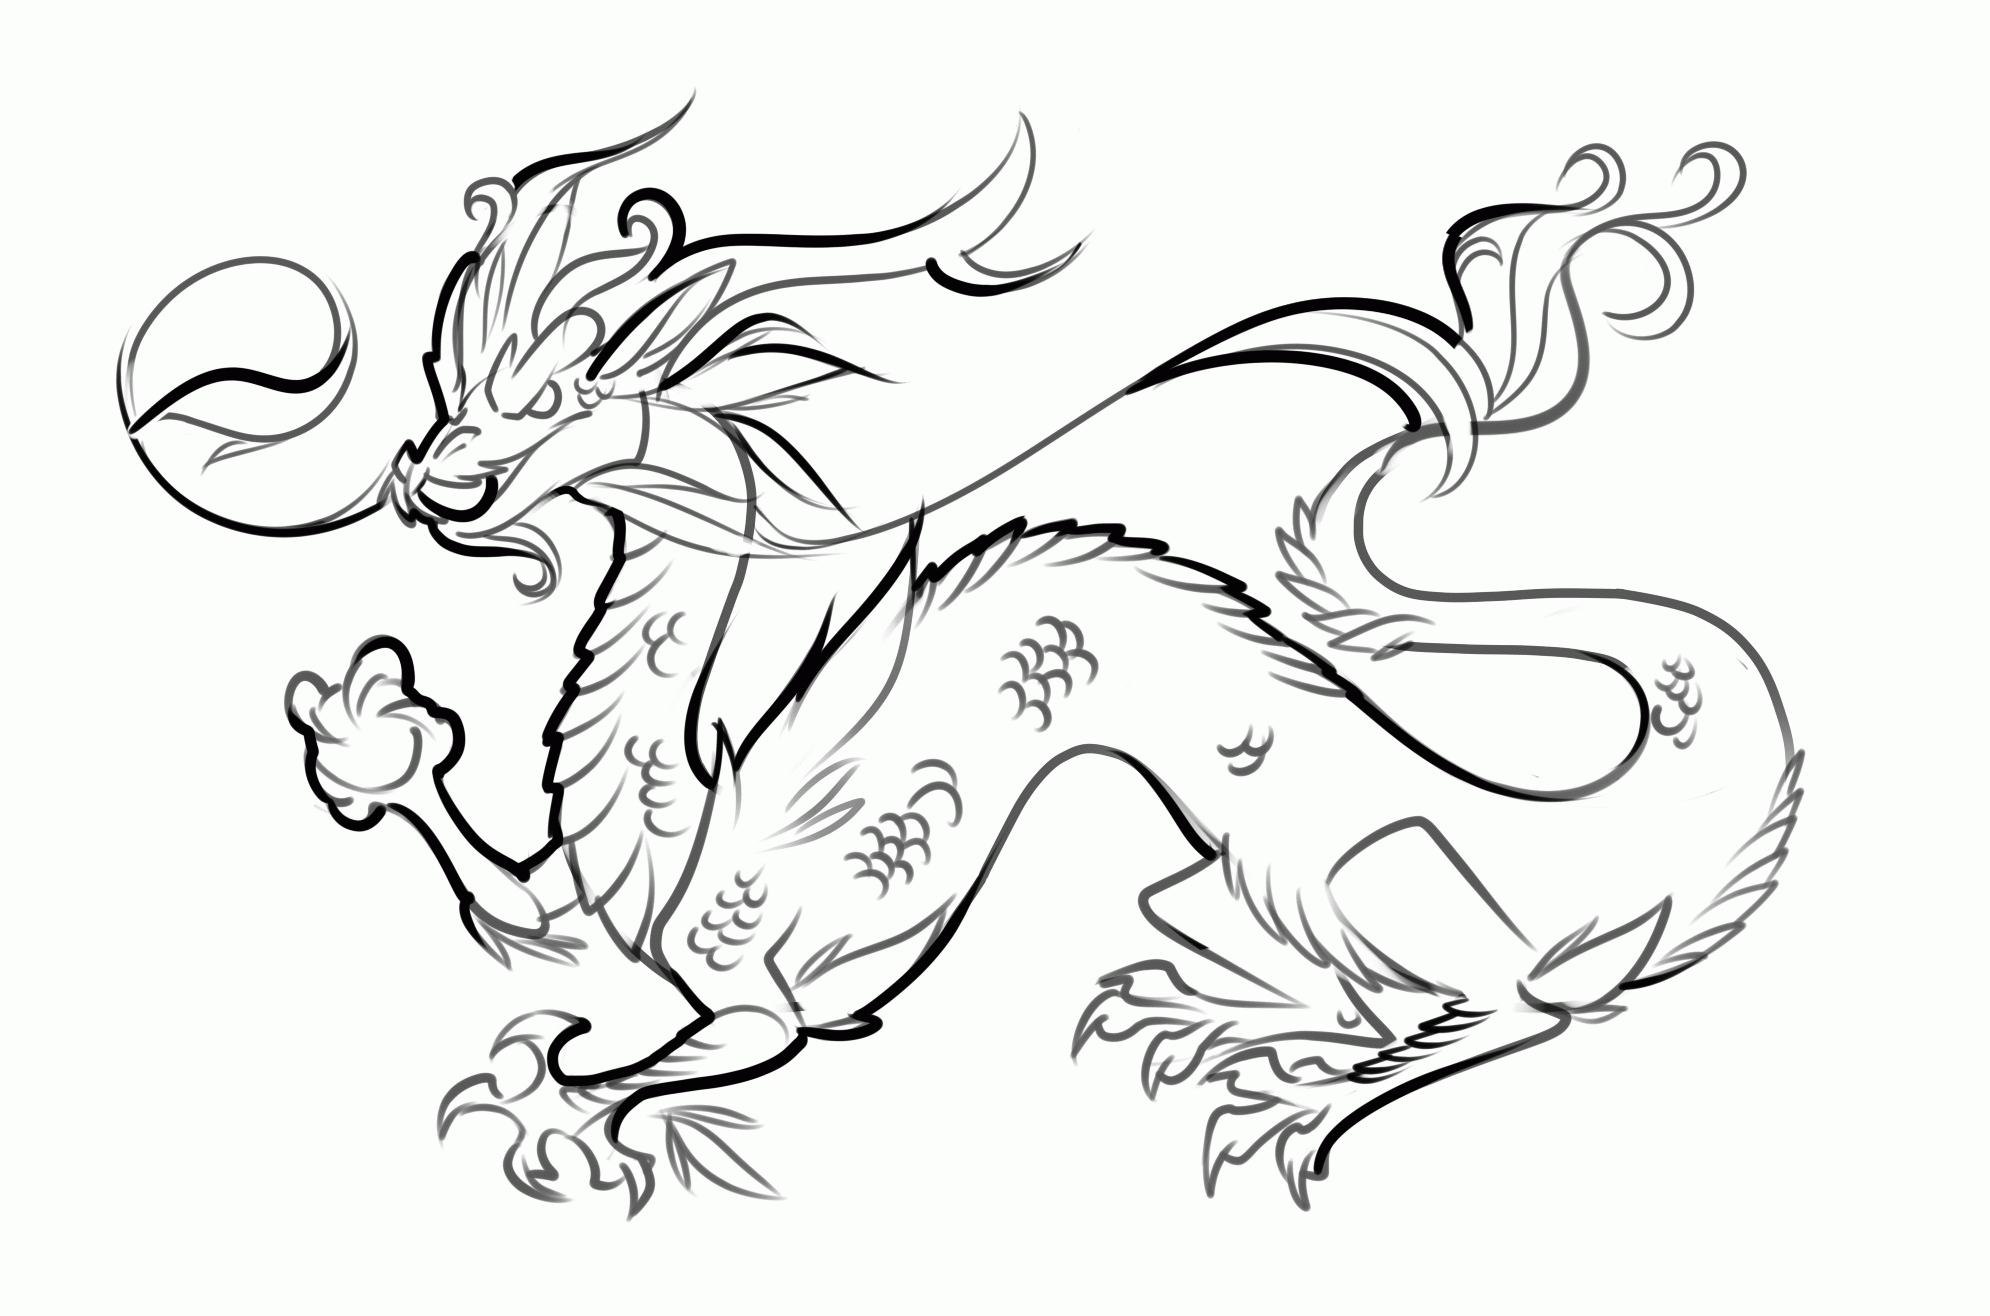 Dragon 23 For Kids Coloring Page